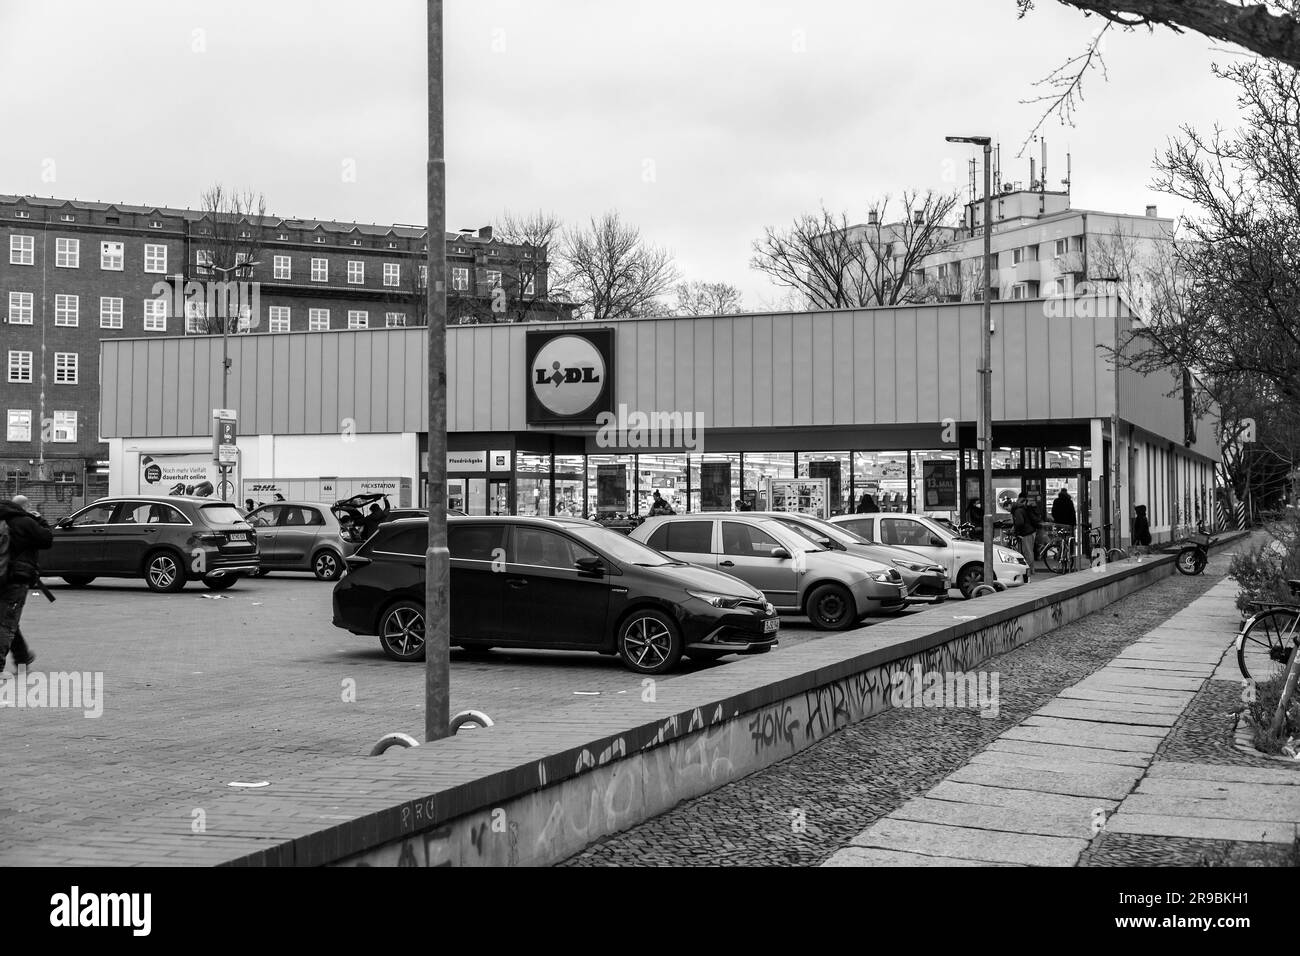 Berlin, Germany - 17 DEC 2021: Kreuzberg branch of Lidl store. Lidl Stiftung & Co. KG is a German international discount retailer chain that operates Stock Photo